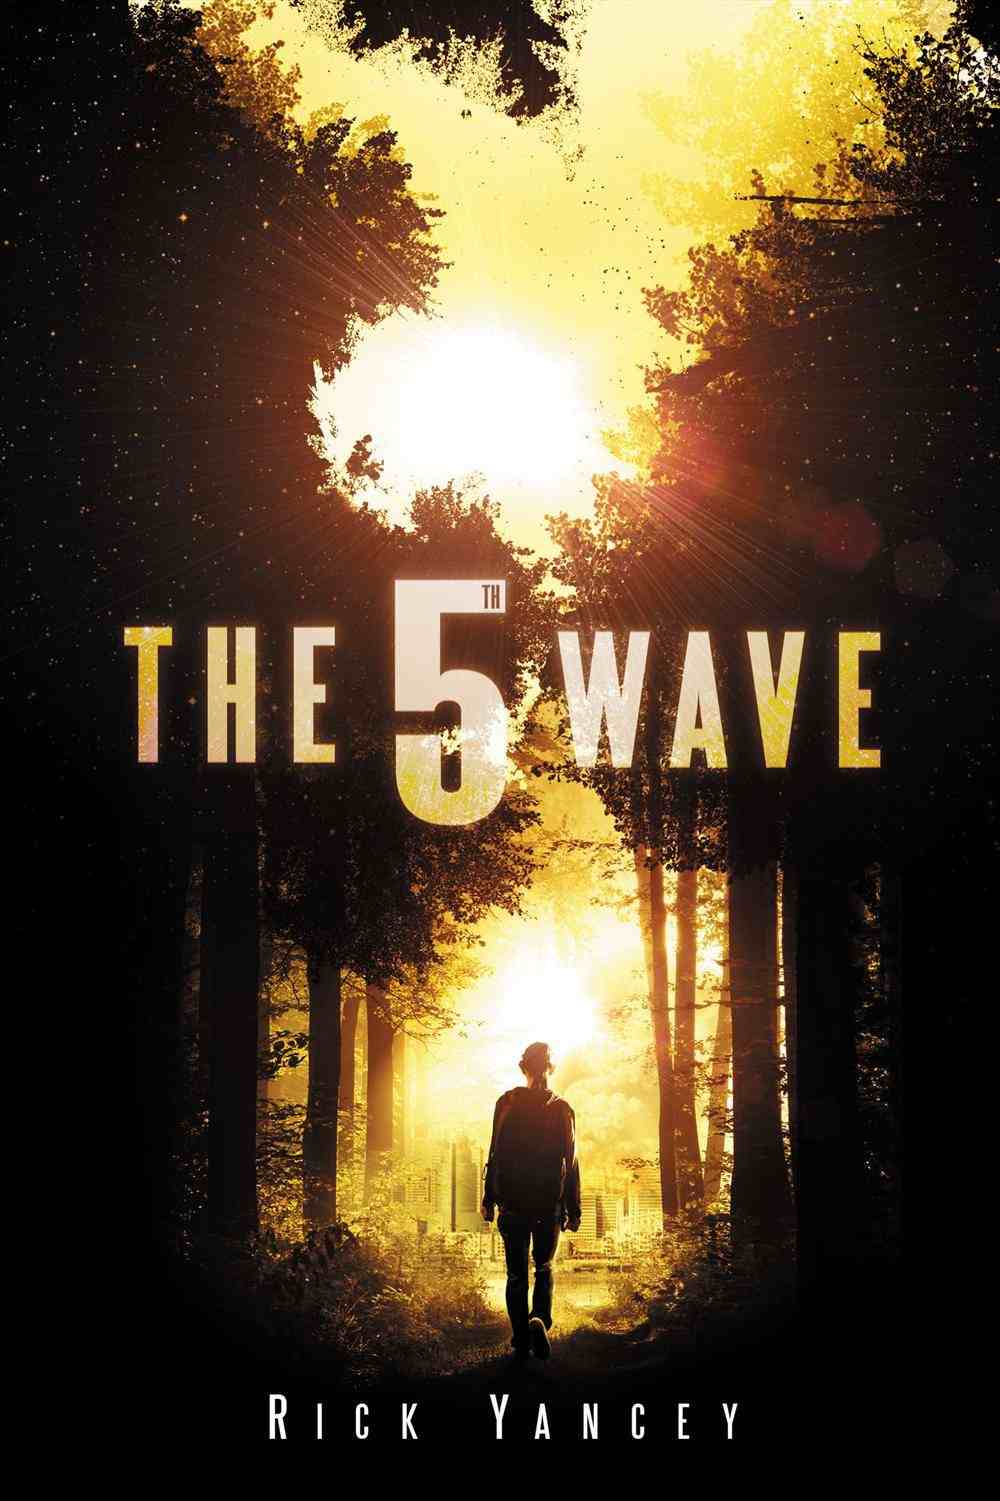 Book Review: The 5th Wave by Rick Yancey